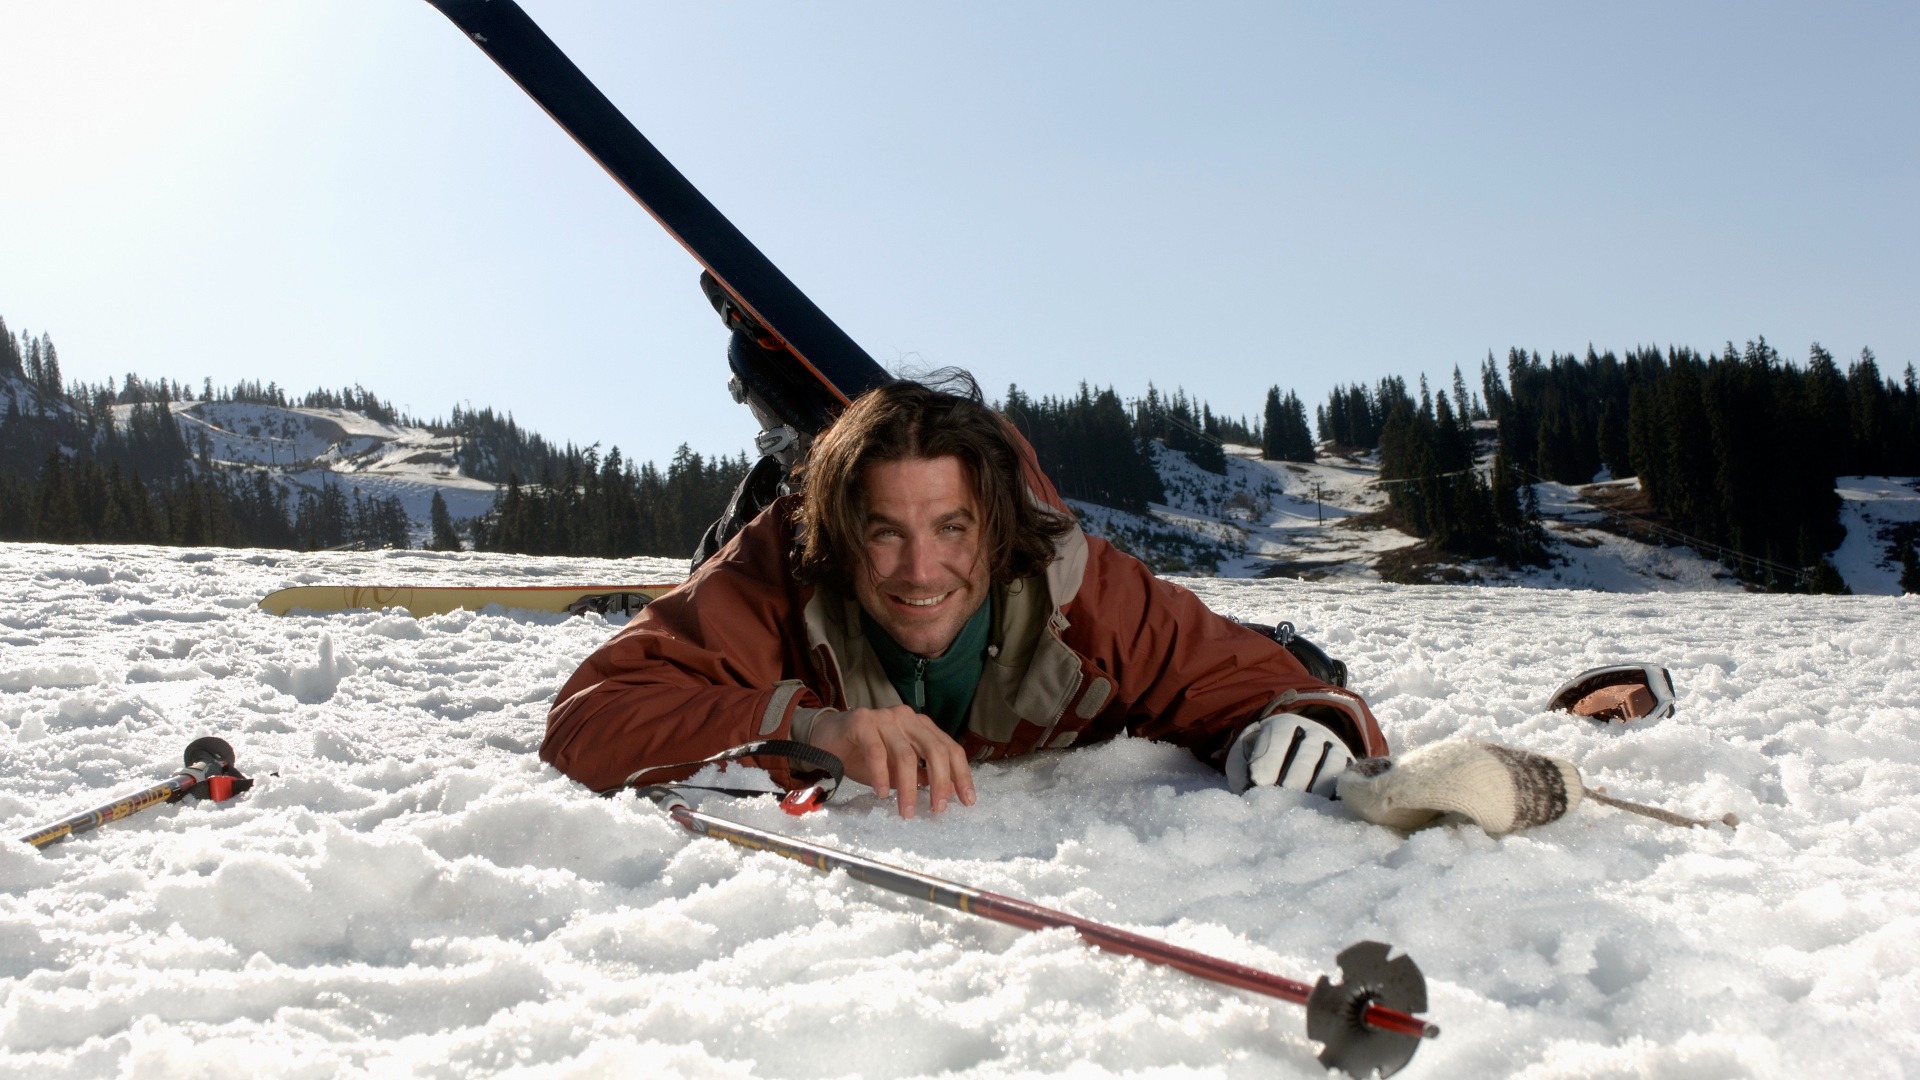 How To Fall Down And Get Up Safely Cross Country Skiing